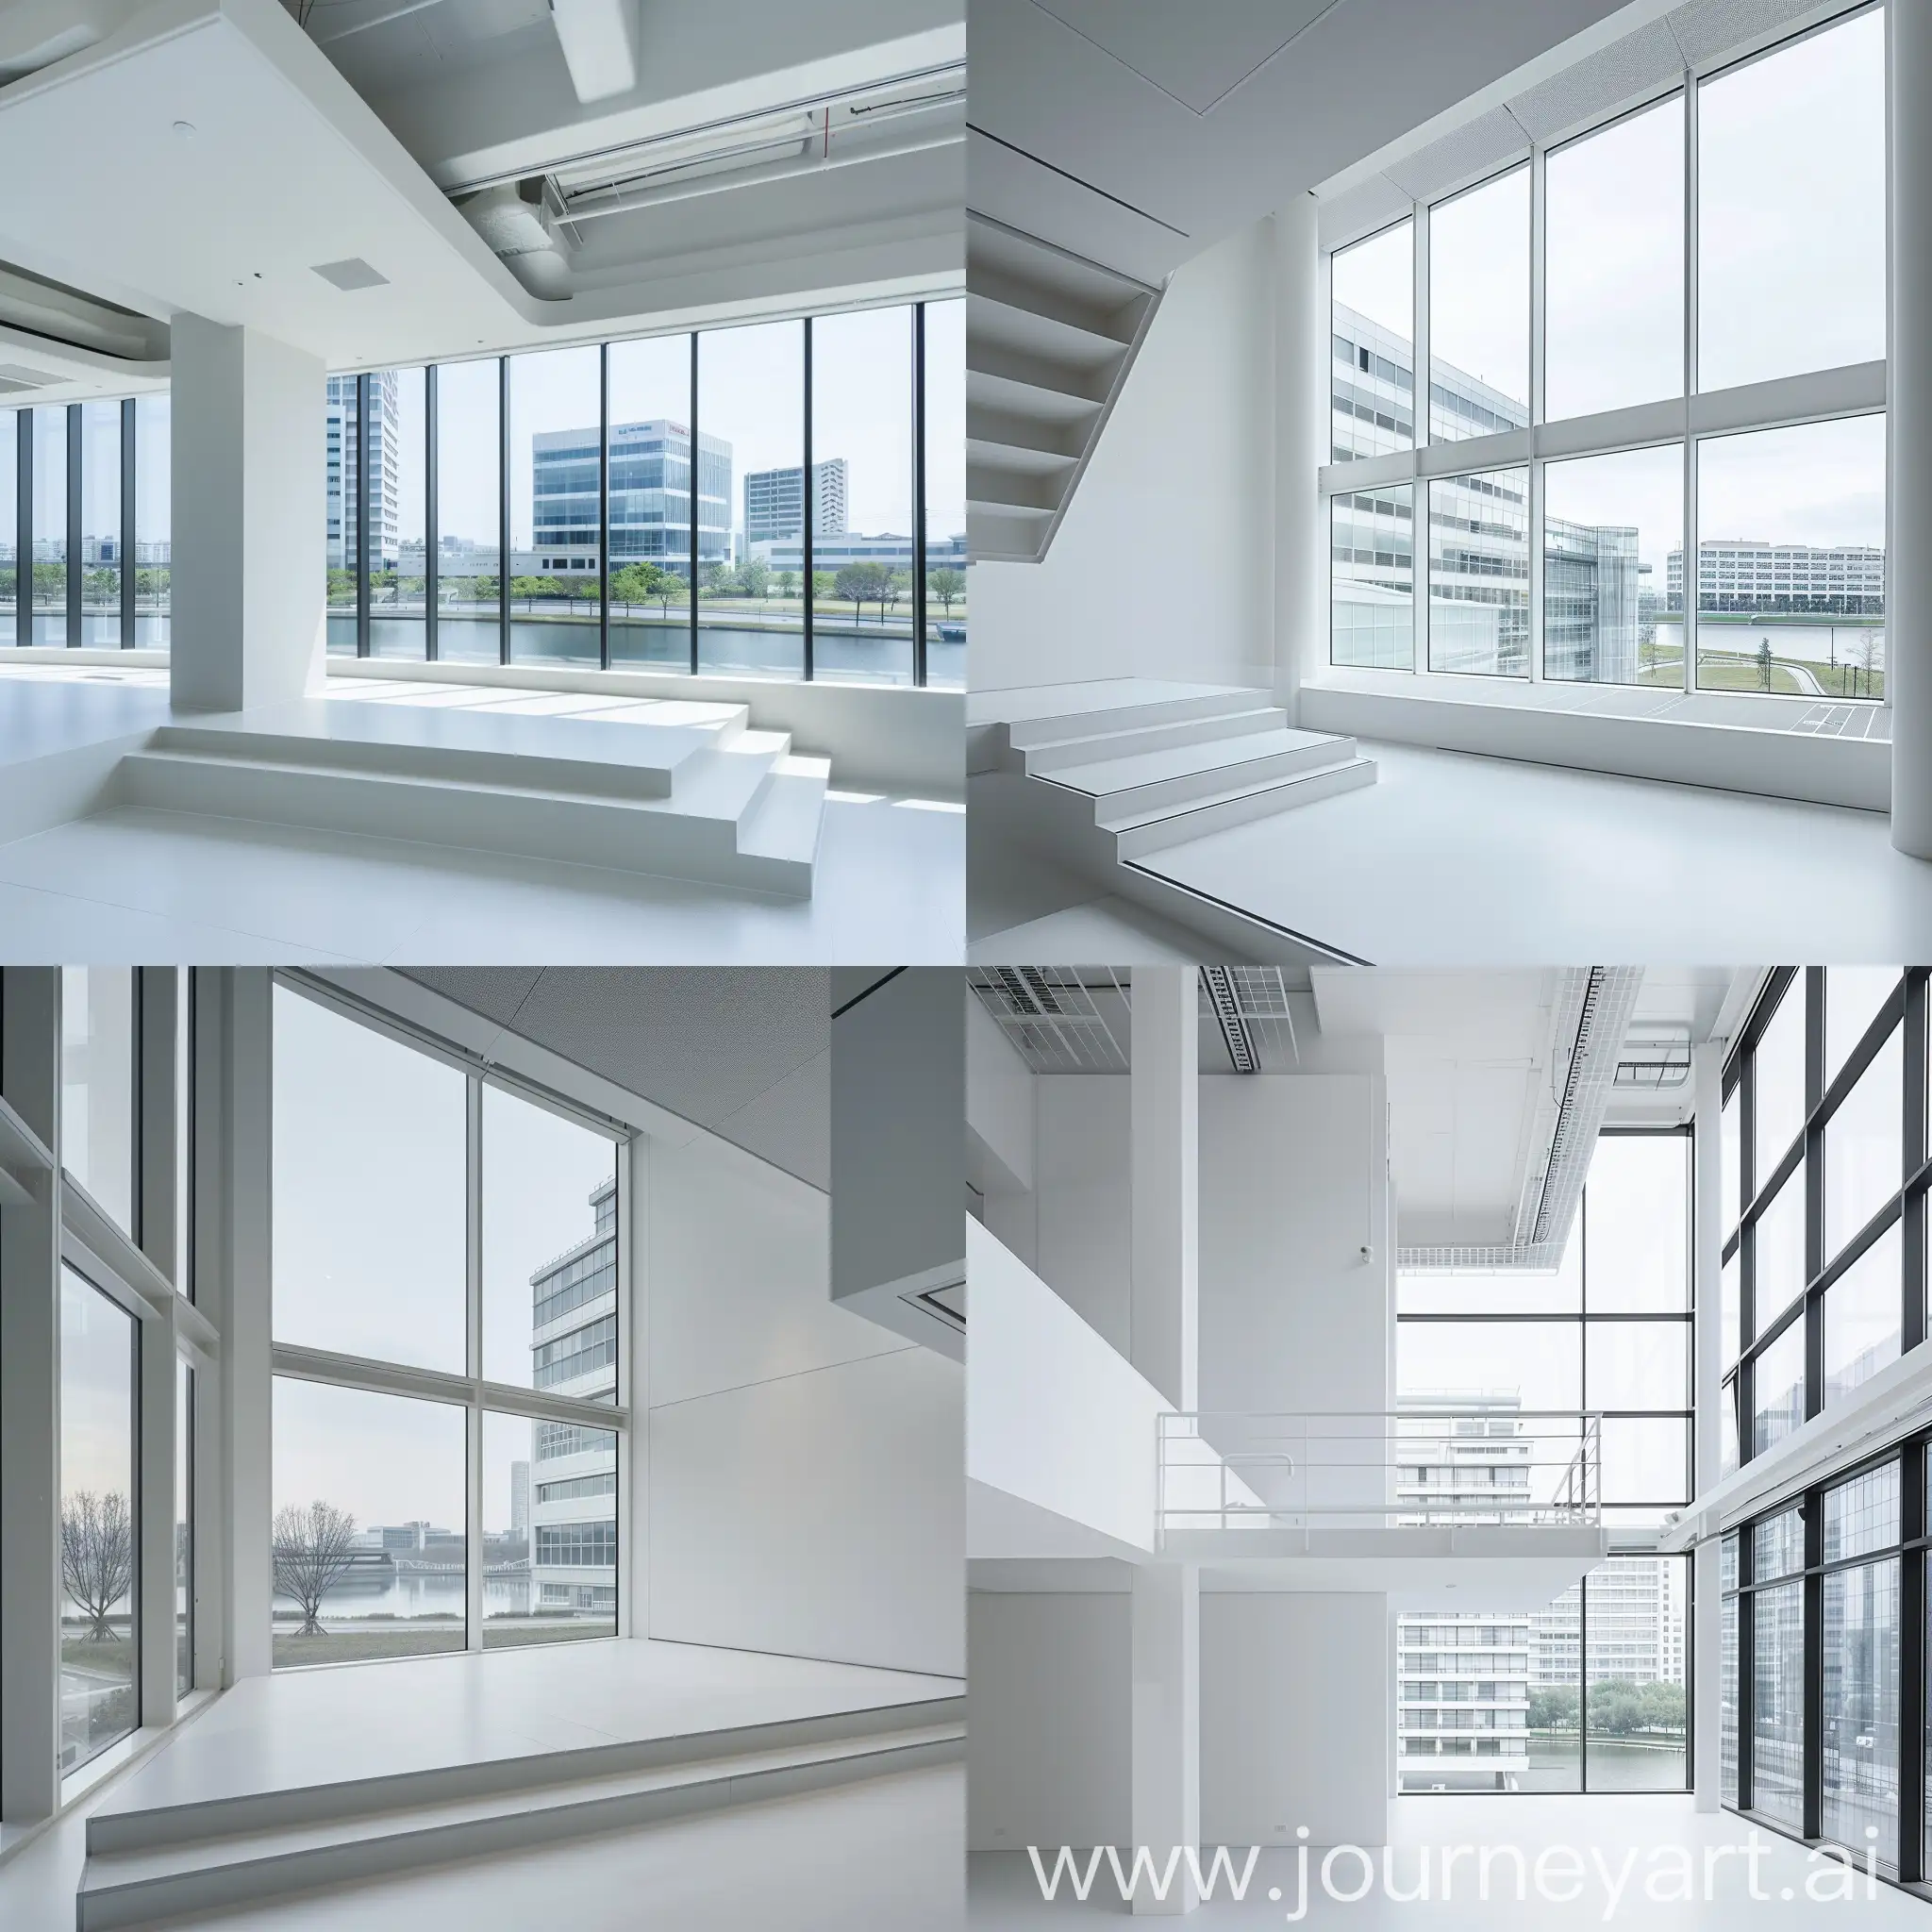 Indoor-Observation-Platform-with-Panoramic-Urban-and-Lake-Views